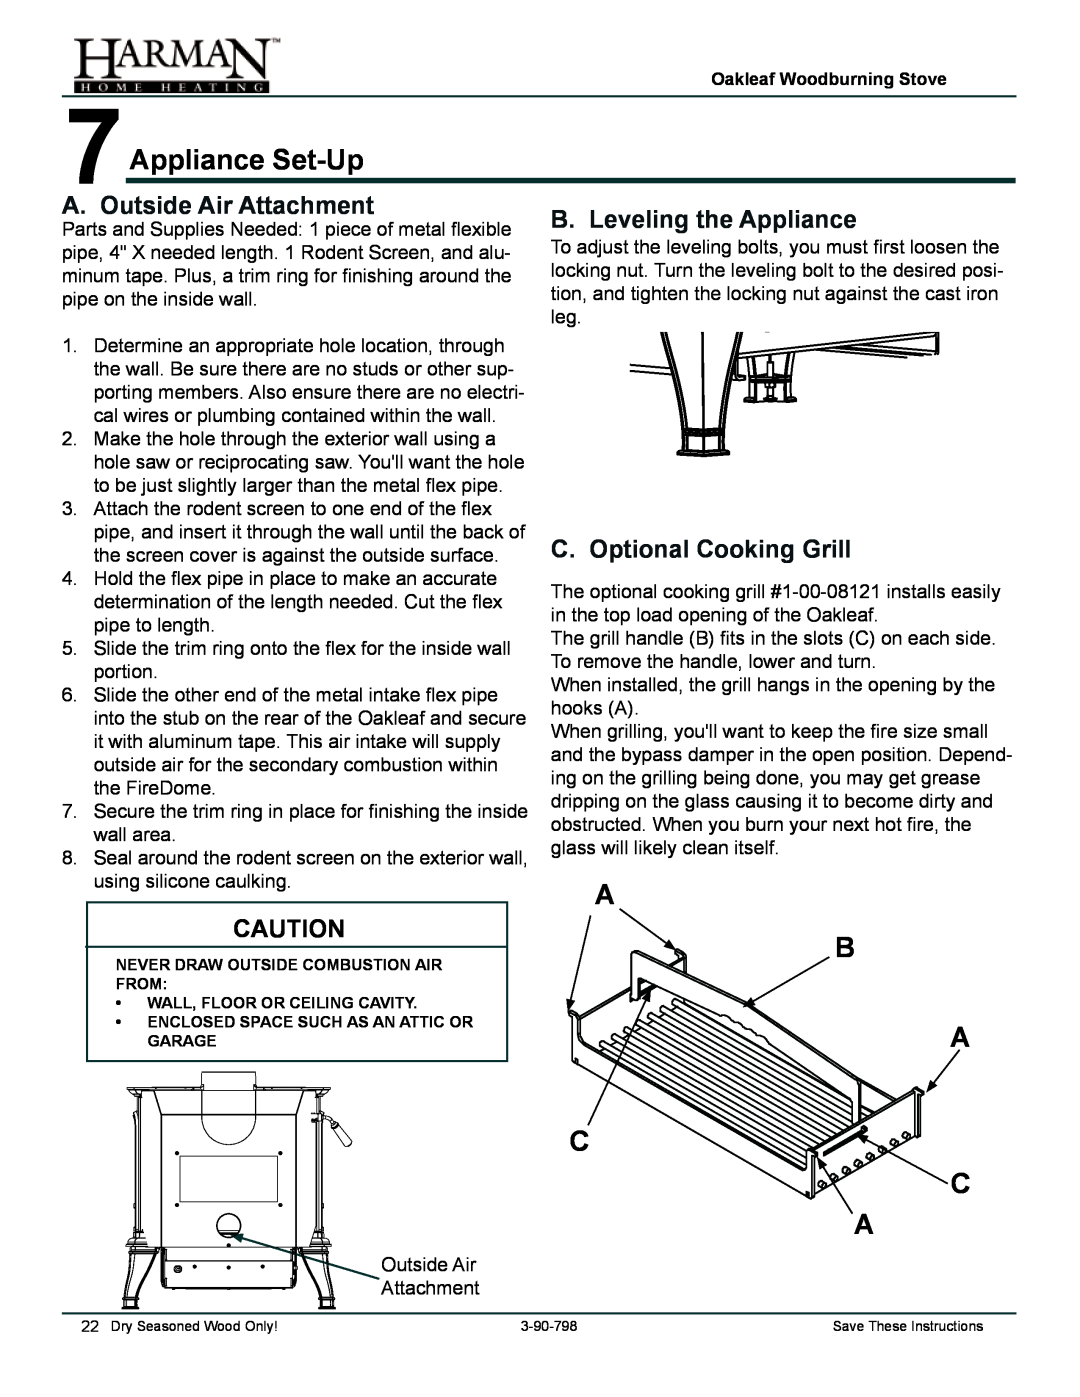 Harman Stove Company 1-90-797000 manual Appliance Set-Up, C C A, A. Outside Air Attachment, B. Leveling the Appliance 